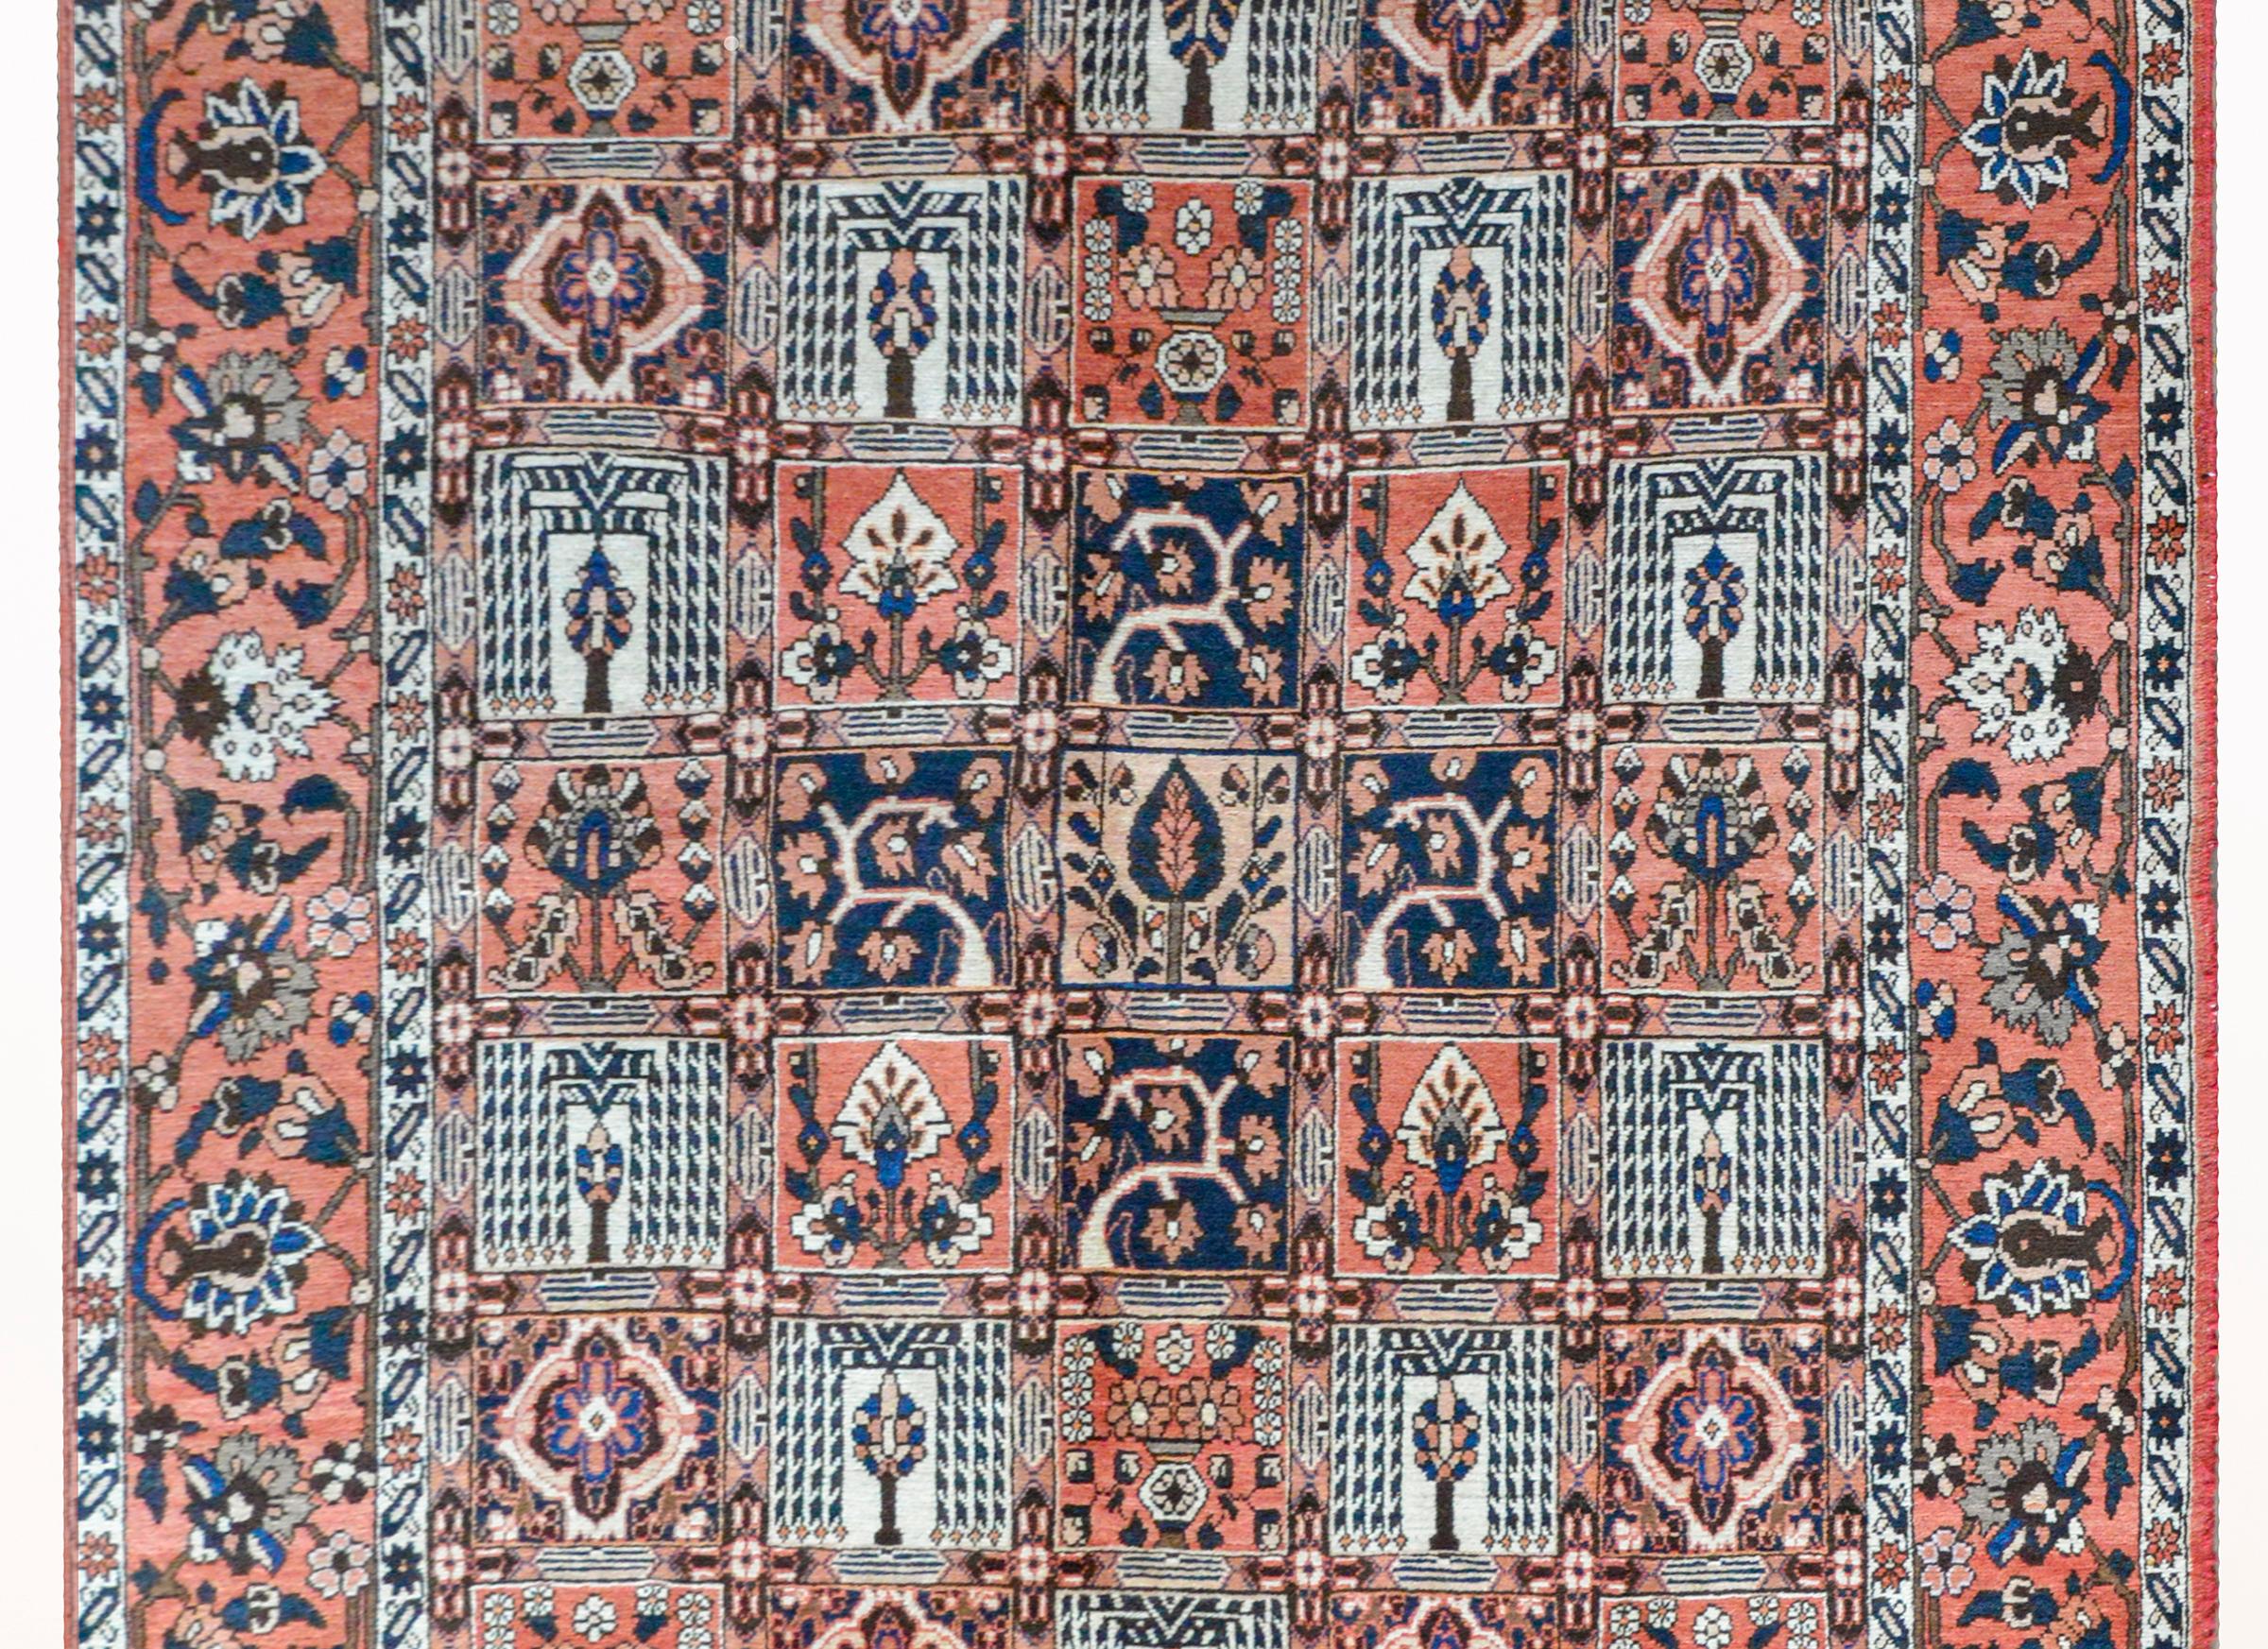 A vintage Persian Bakhtiari rug with a patchwork pattern depicting various trees, trees-of-life, and flowers, surrounded by a wide large-scale floral and vine pattern flanked by a pair of petite floral partnered stripes, and all woven in red, white